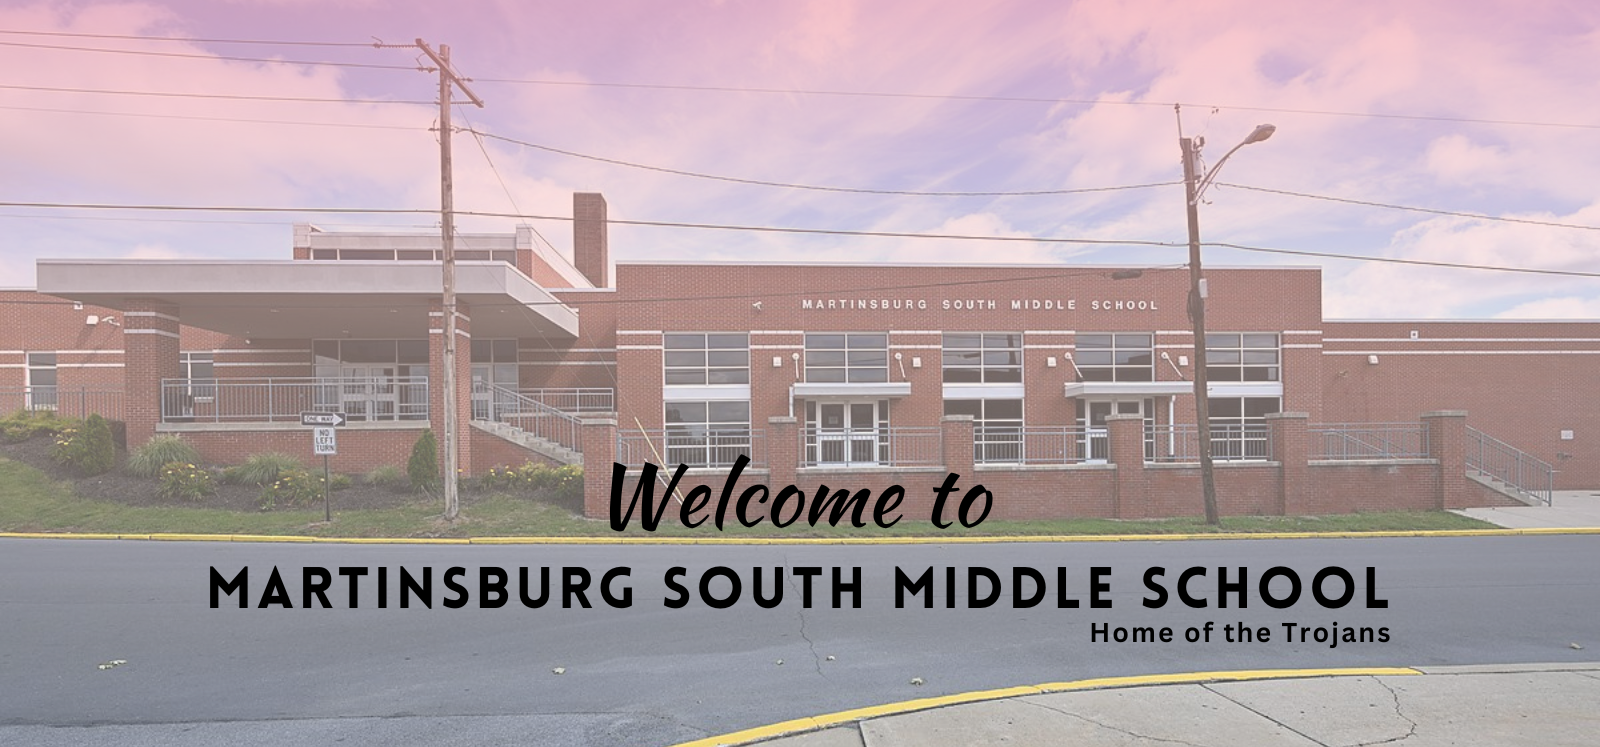 Welcome to Martinsburg South Middle School - Home of the Trojans